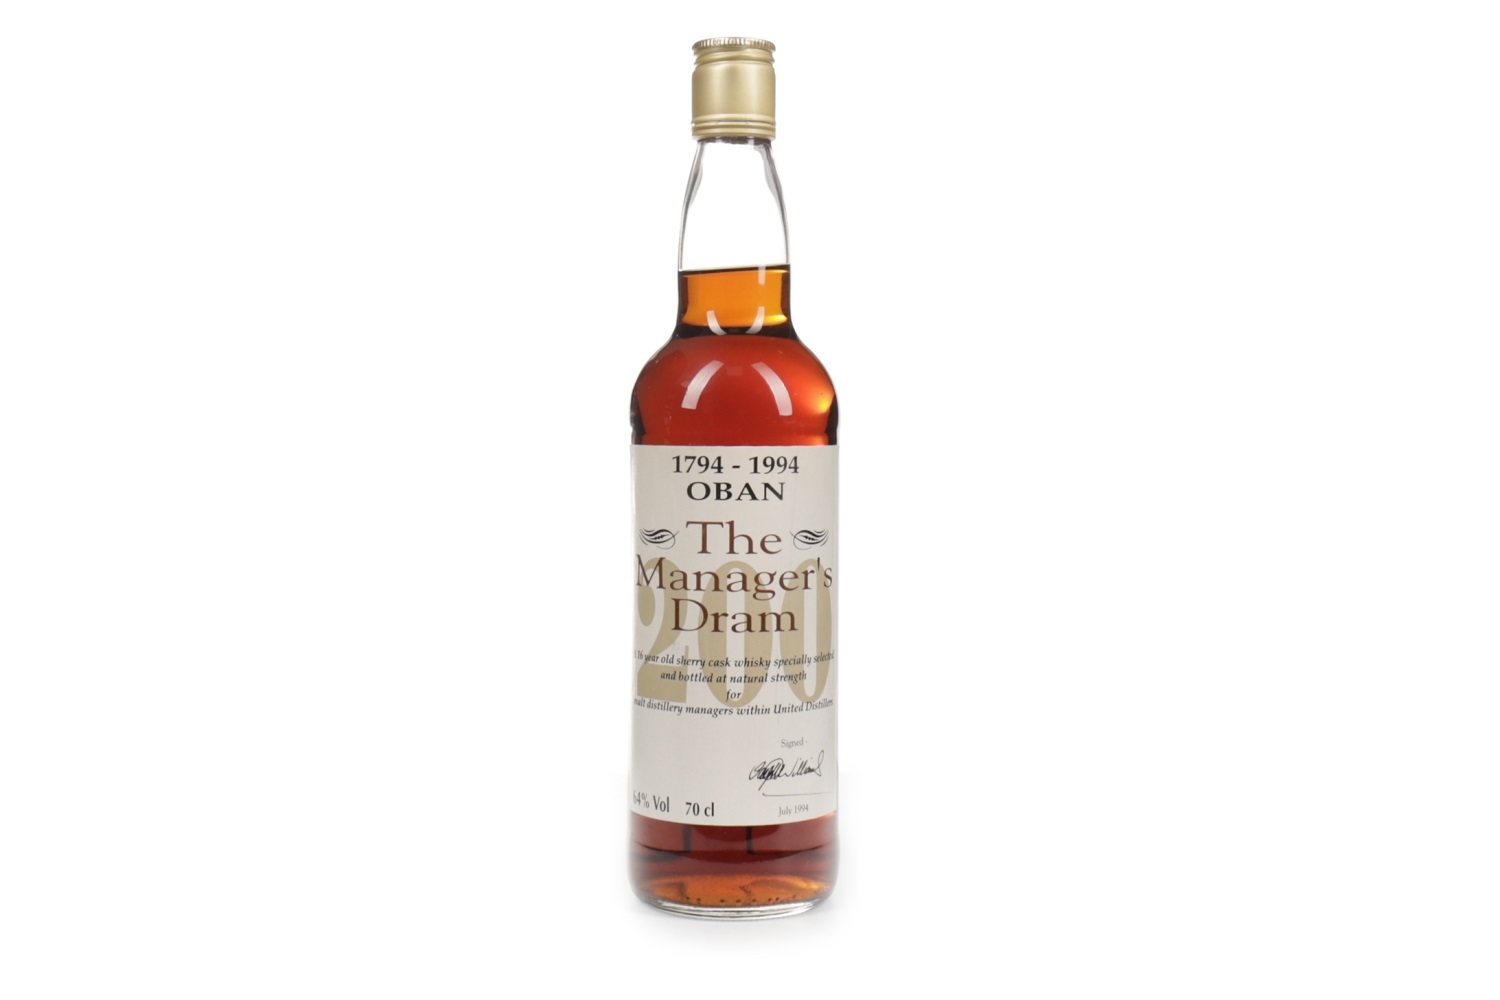 OBAN THE MANAGER'S DRAM 200th ANNIVERSARY AGED 16 YEARS